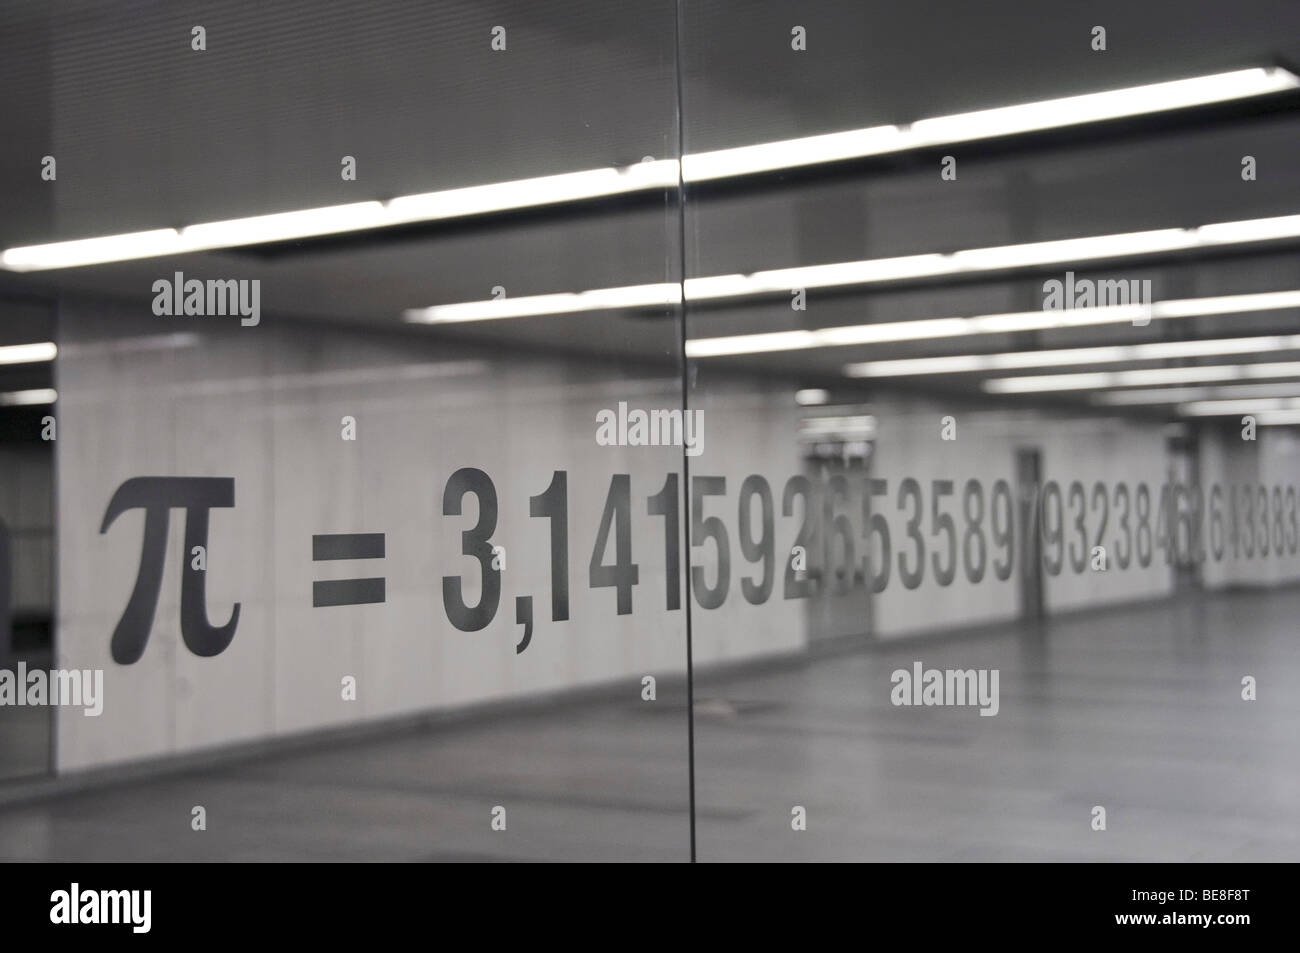 Representation of the number pi, art installation, Pi, by the artist Ken Lum at the Opera House passage in the subway in Vienna Stock Photo